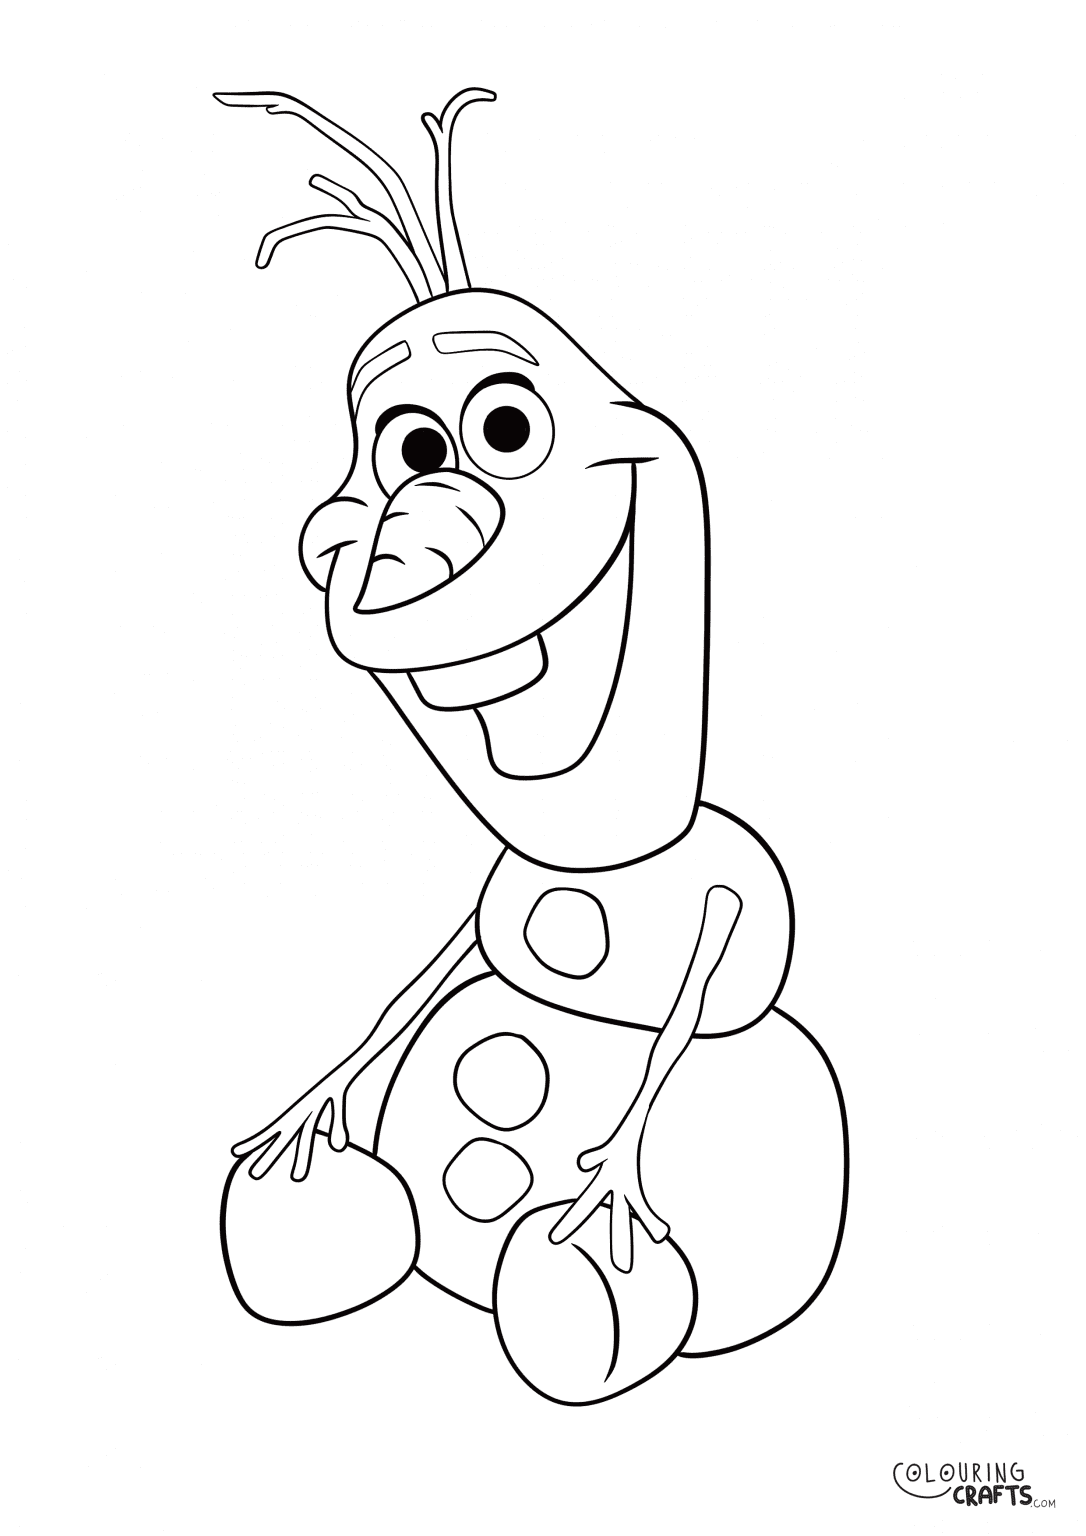 Disney Frozen Olaf Sat Down Colouring Page - Colouring Crafts